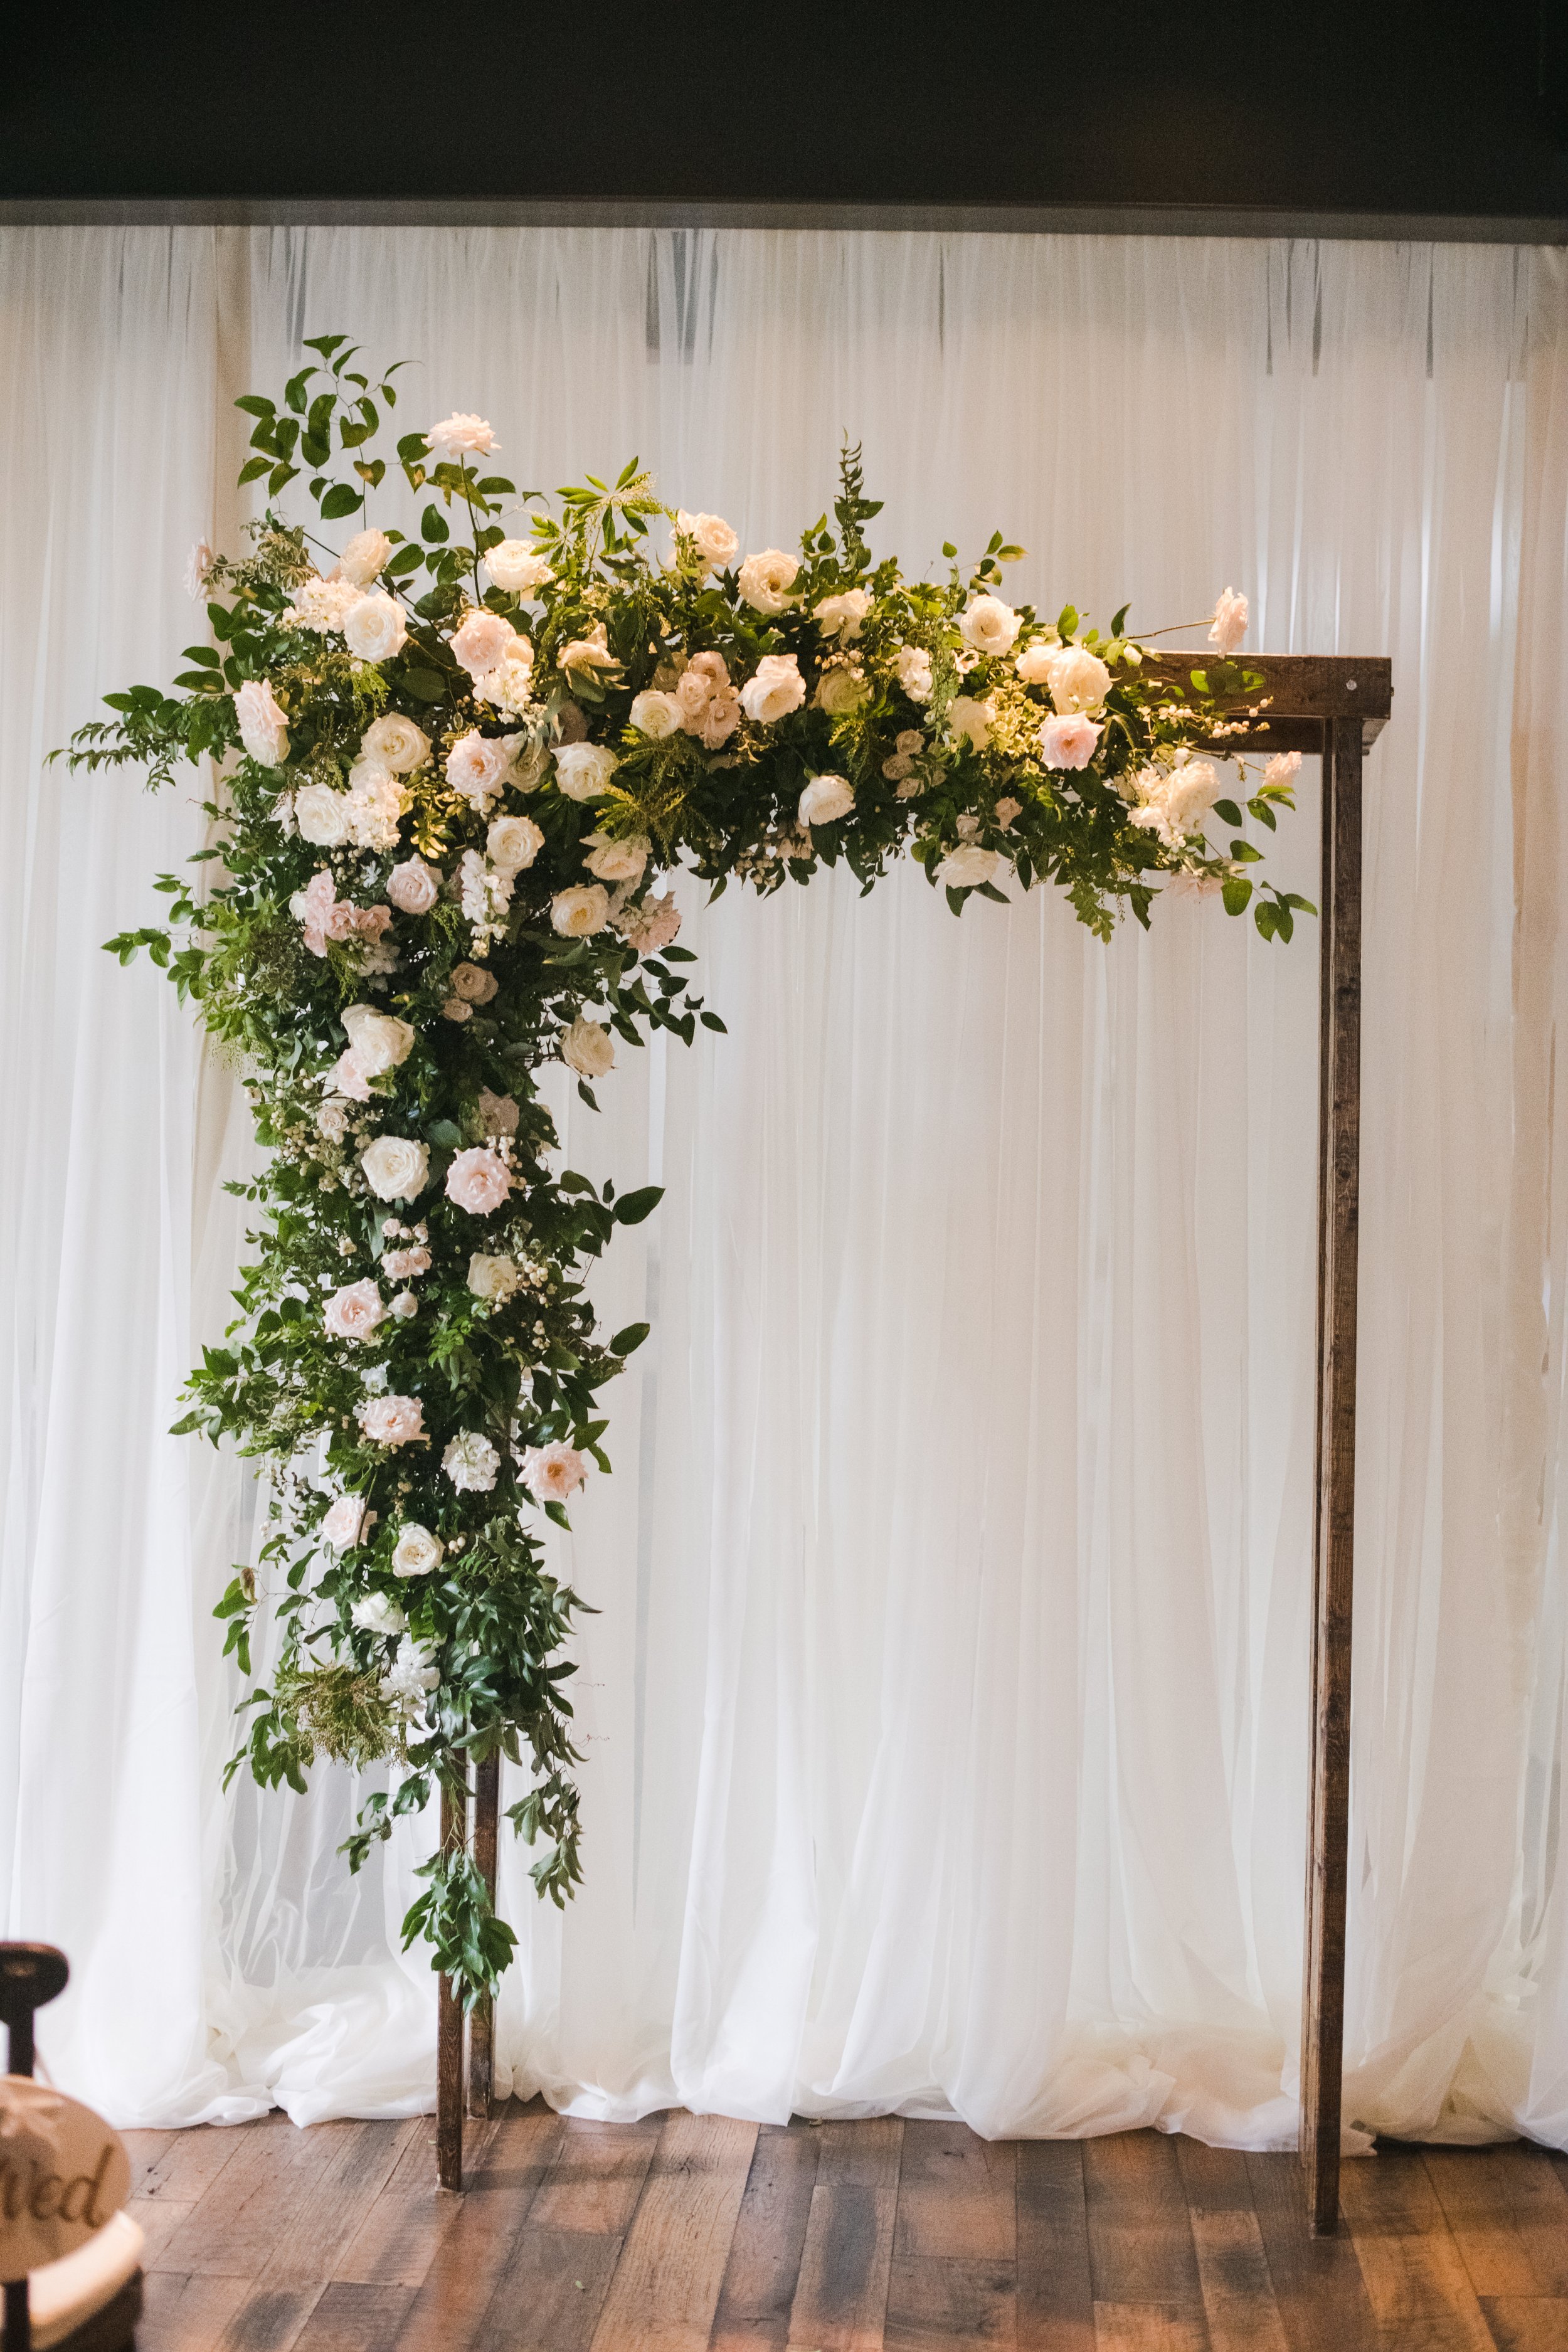 Lush ceremony arbor installation with all white garden roses and ranunculus with natural, untamed greenery. For garden-inspired wedding Designed by Rosemary and Finch in Nashville, TN.